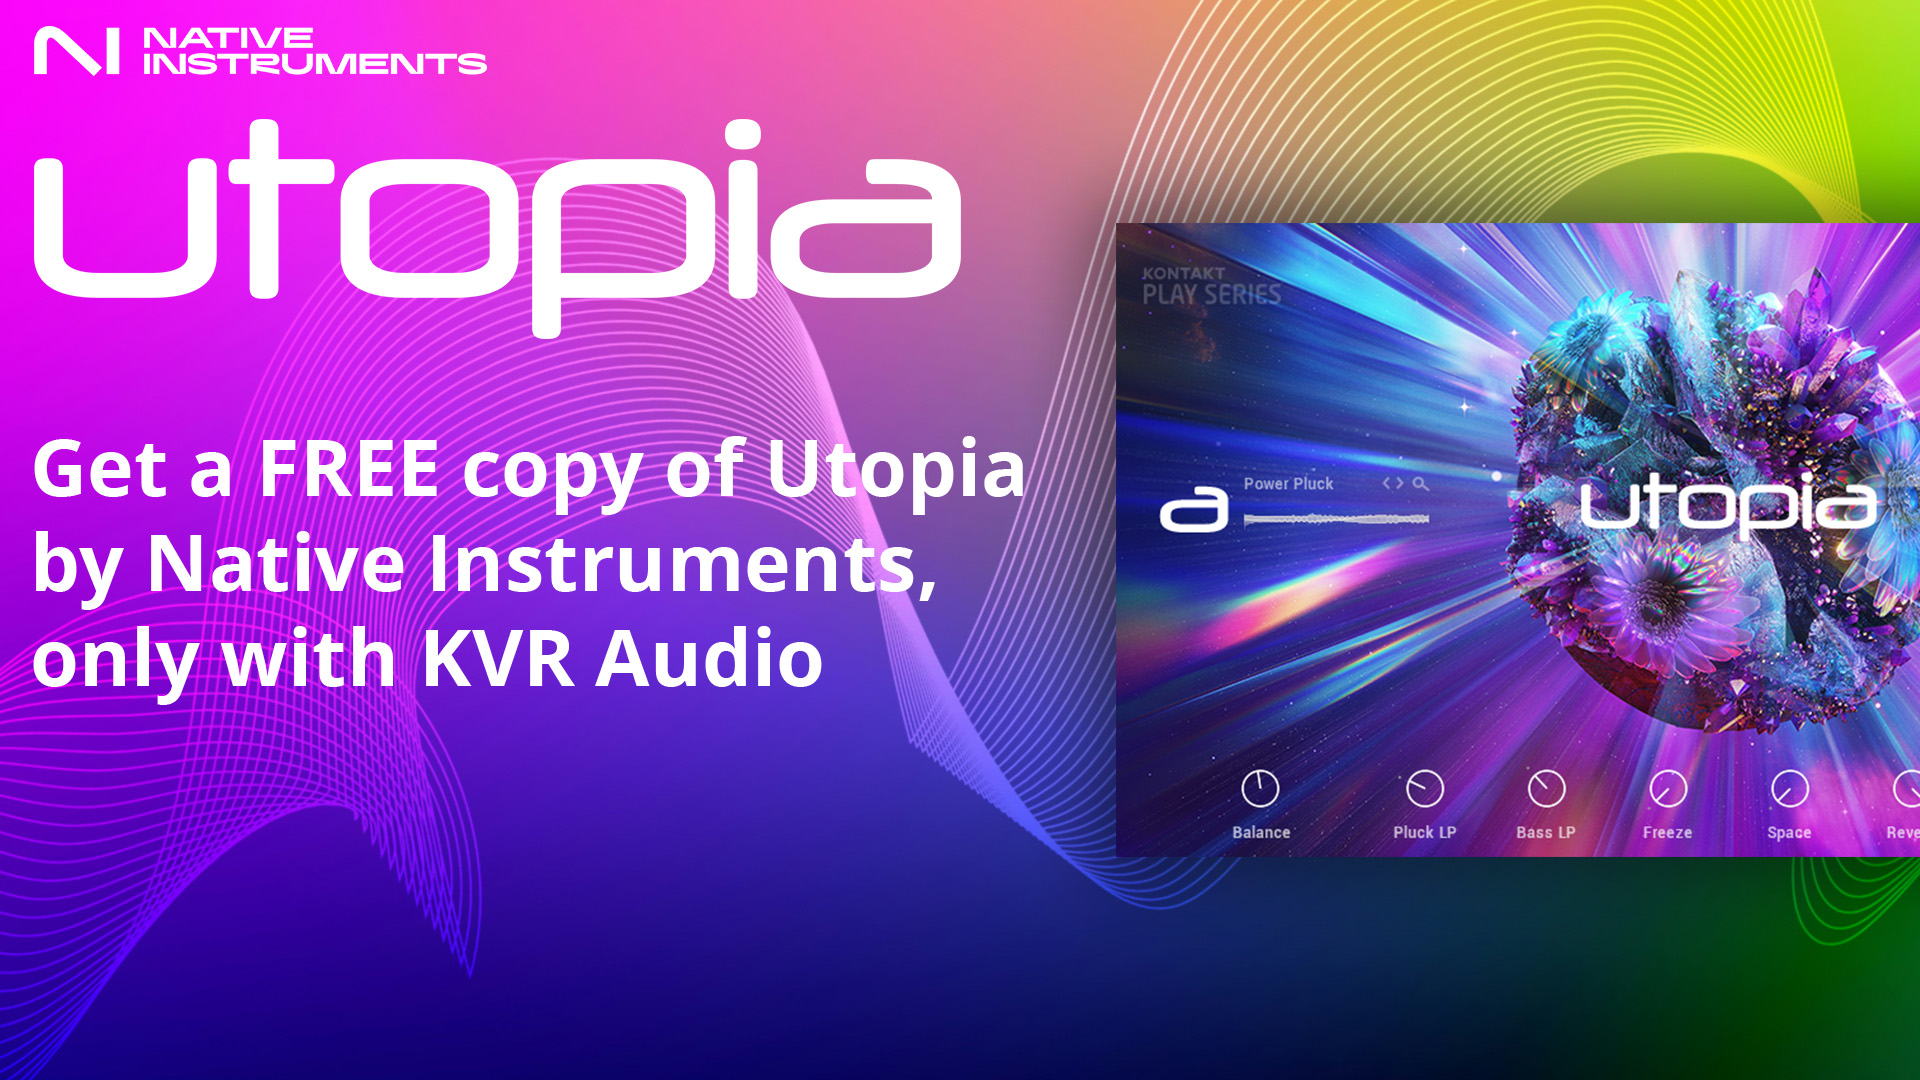 Utopia from Native Instruments is free with KVR, plus win Komplete 14 Ultimate CE and more